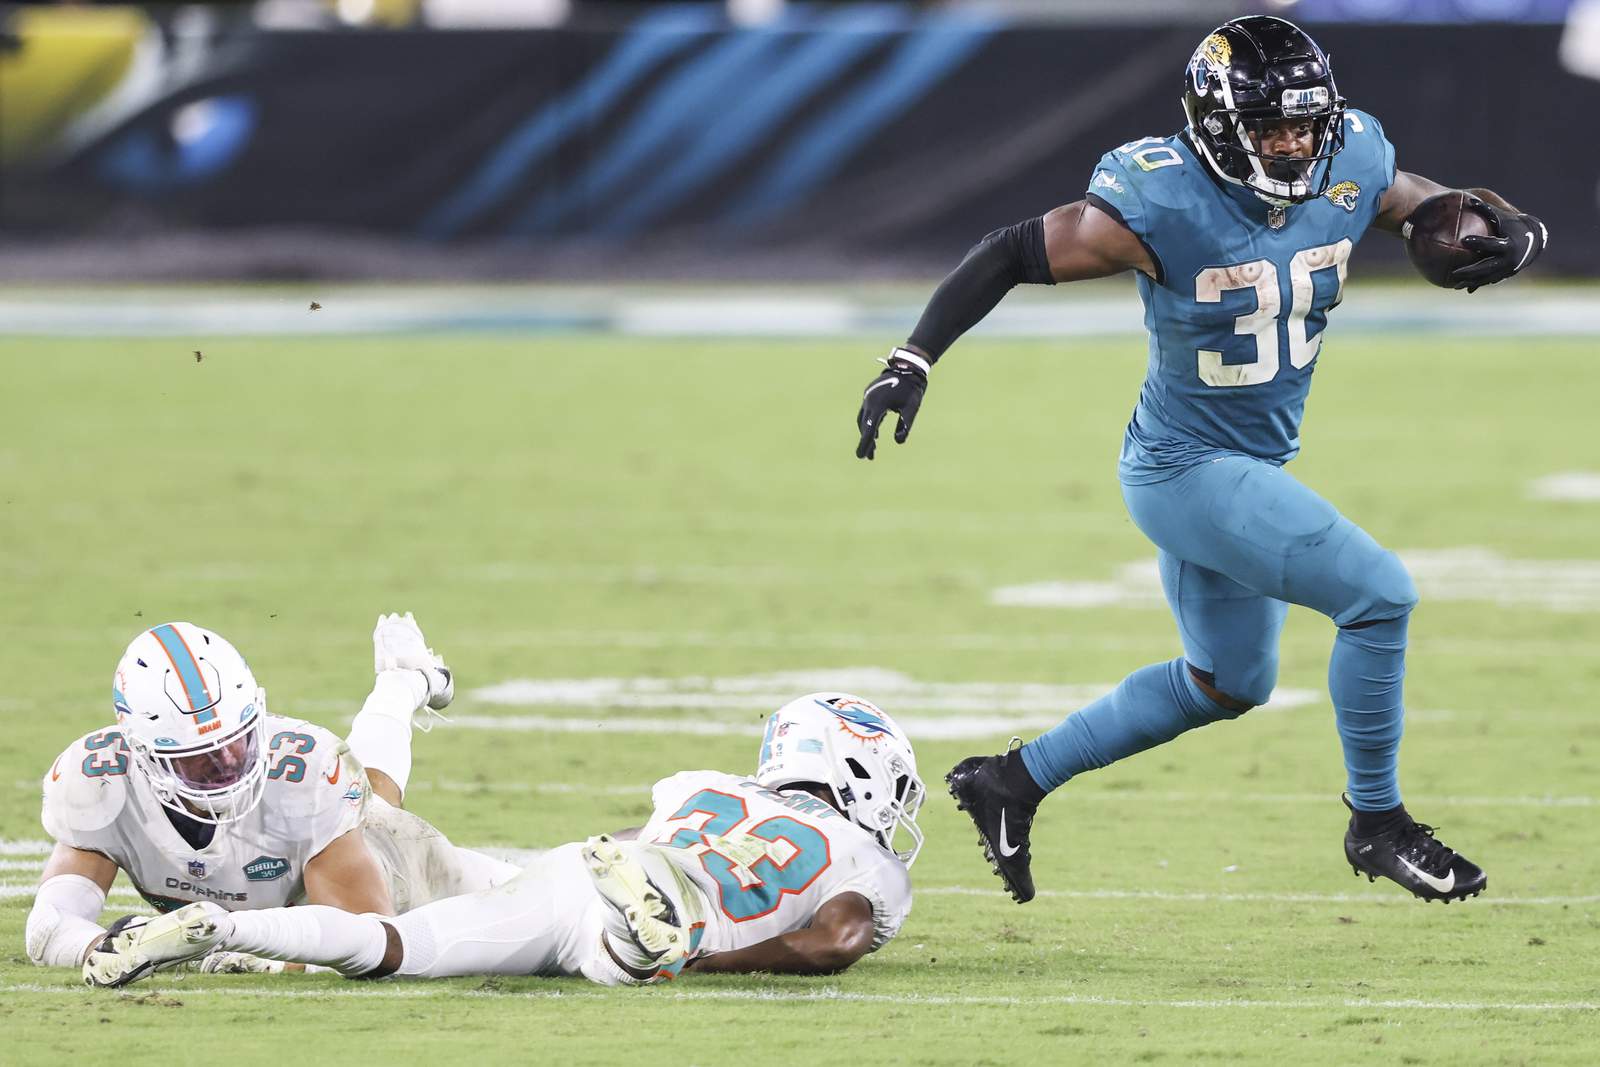 Jaguars' bright spot, running back James Robinson, wins offensive rookie of month honor